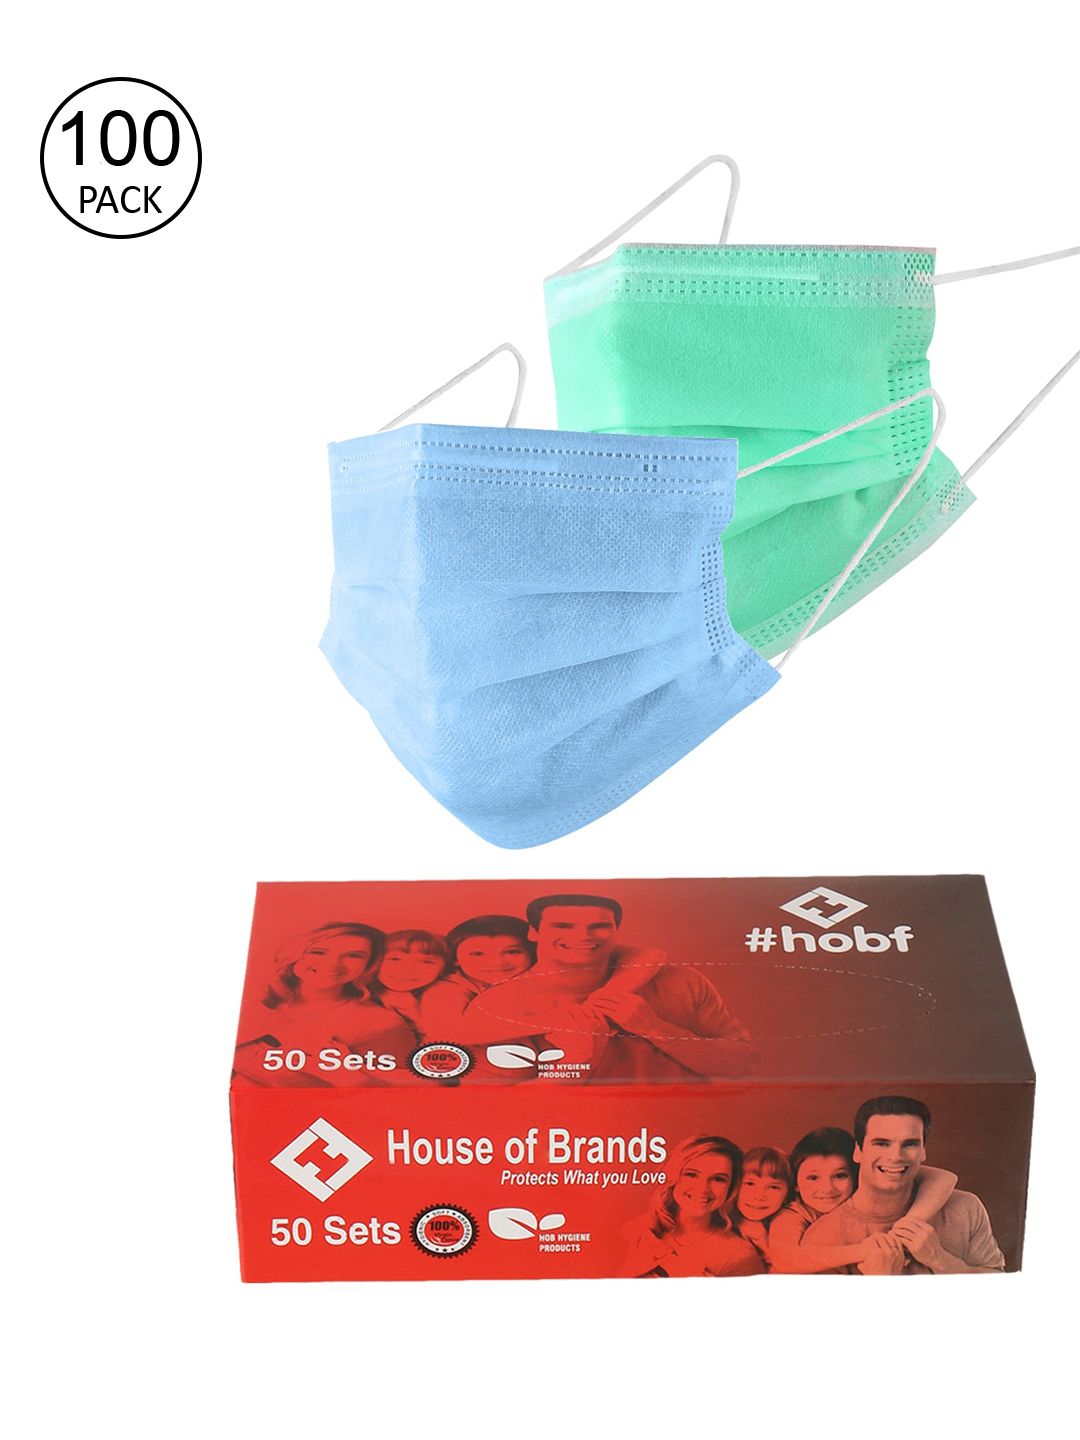 LONDON FASHION hob Unisex Pack Of 100 Green & Blue 3-Ply Adjustable Surgical Mask With Nose Pin Price in India